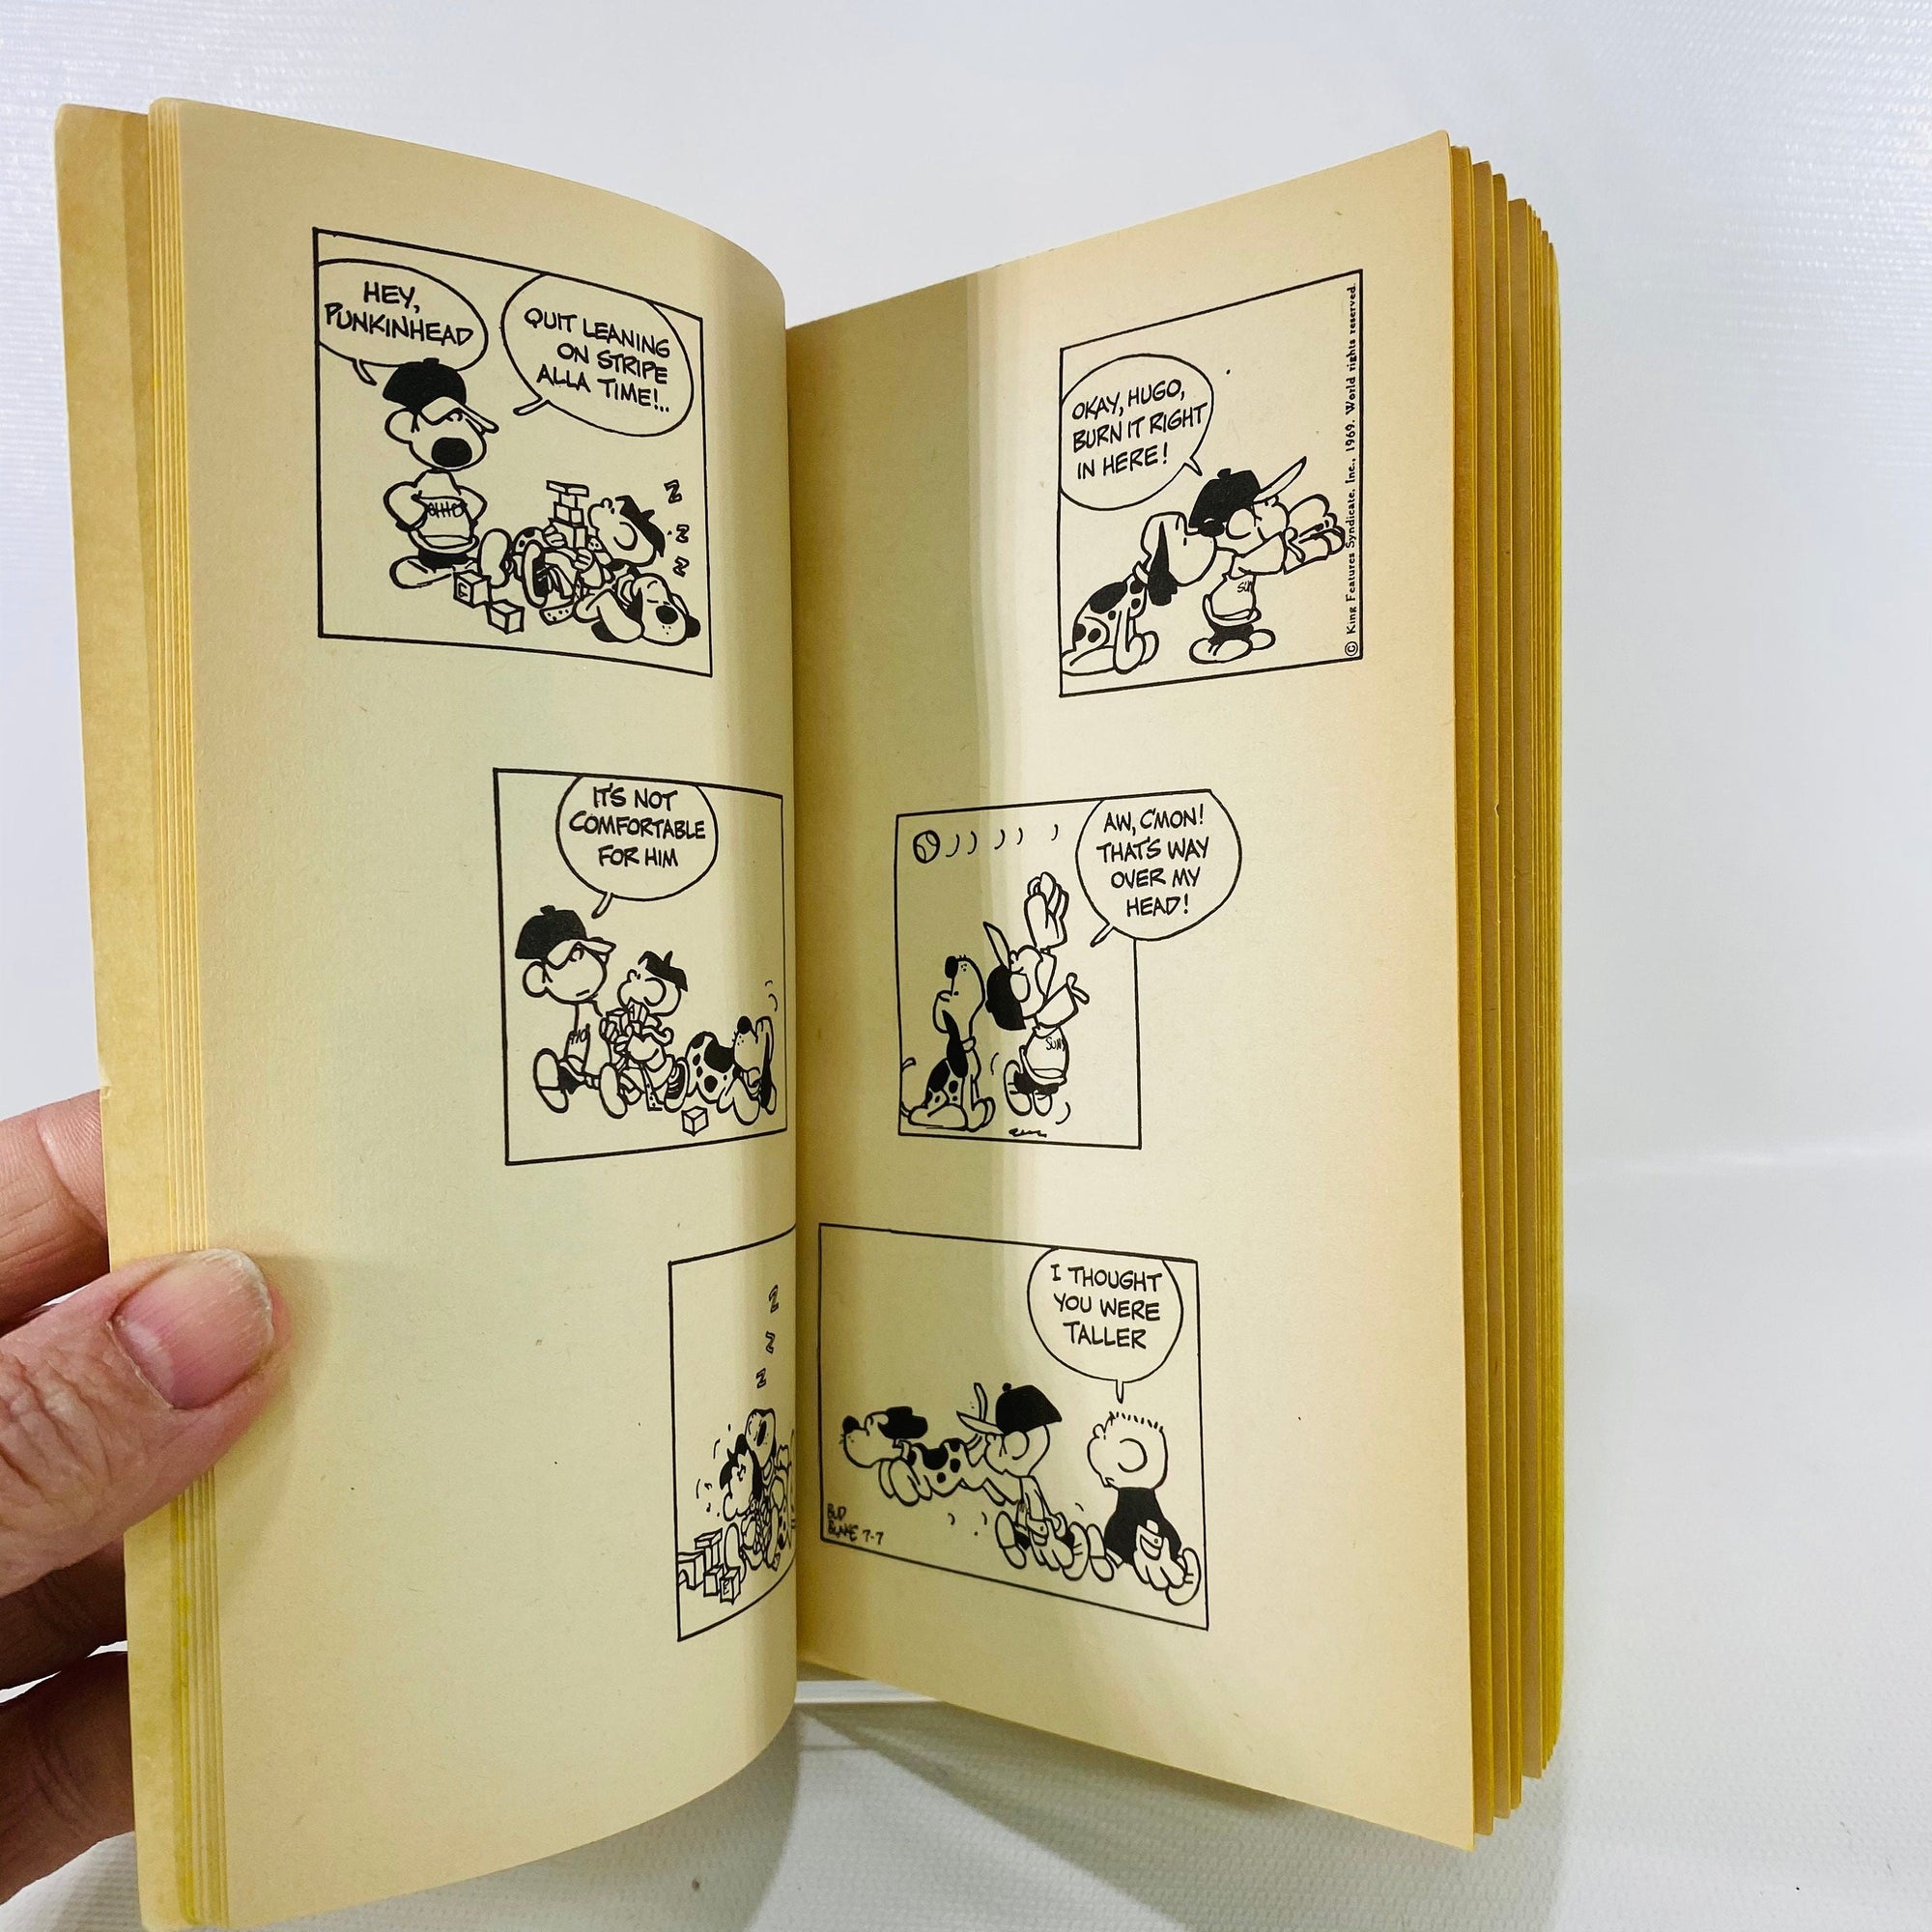 6 Cartoon Books featuring the Peanut's Gang by Charles M. Schulz Starring Charlie Brown SnoopyVintage Book